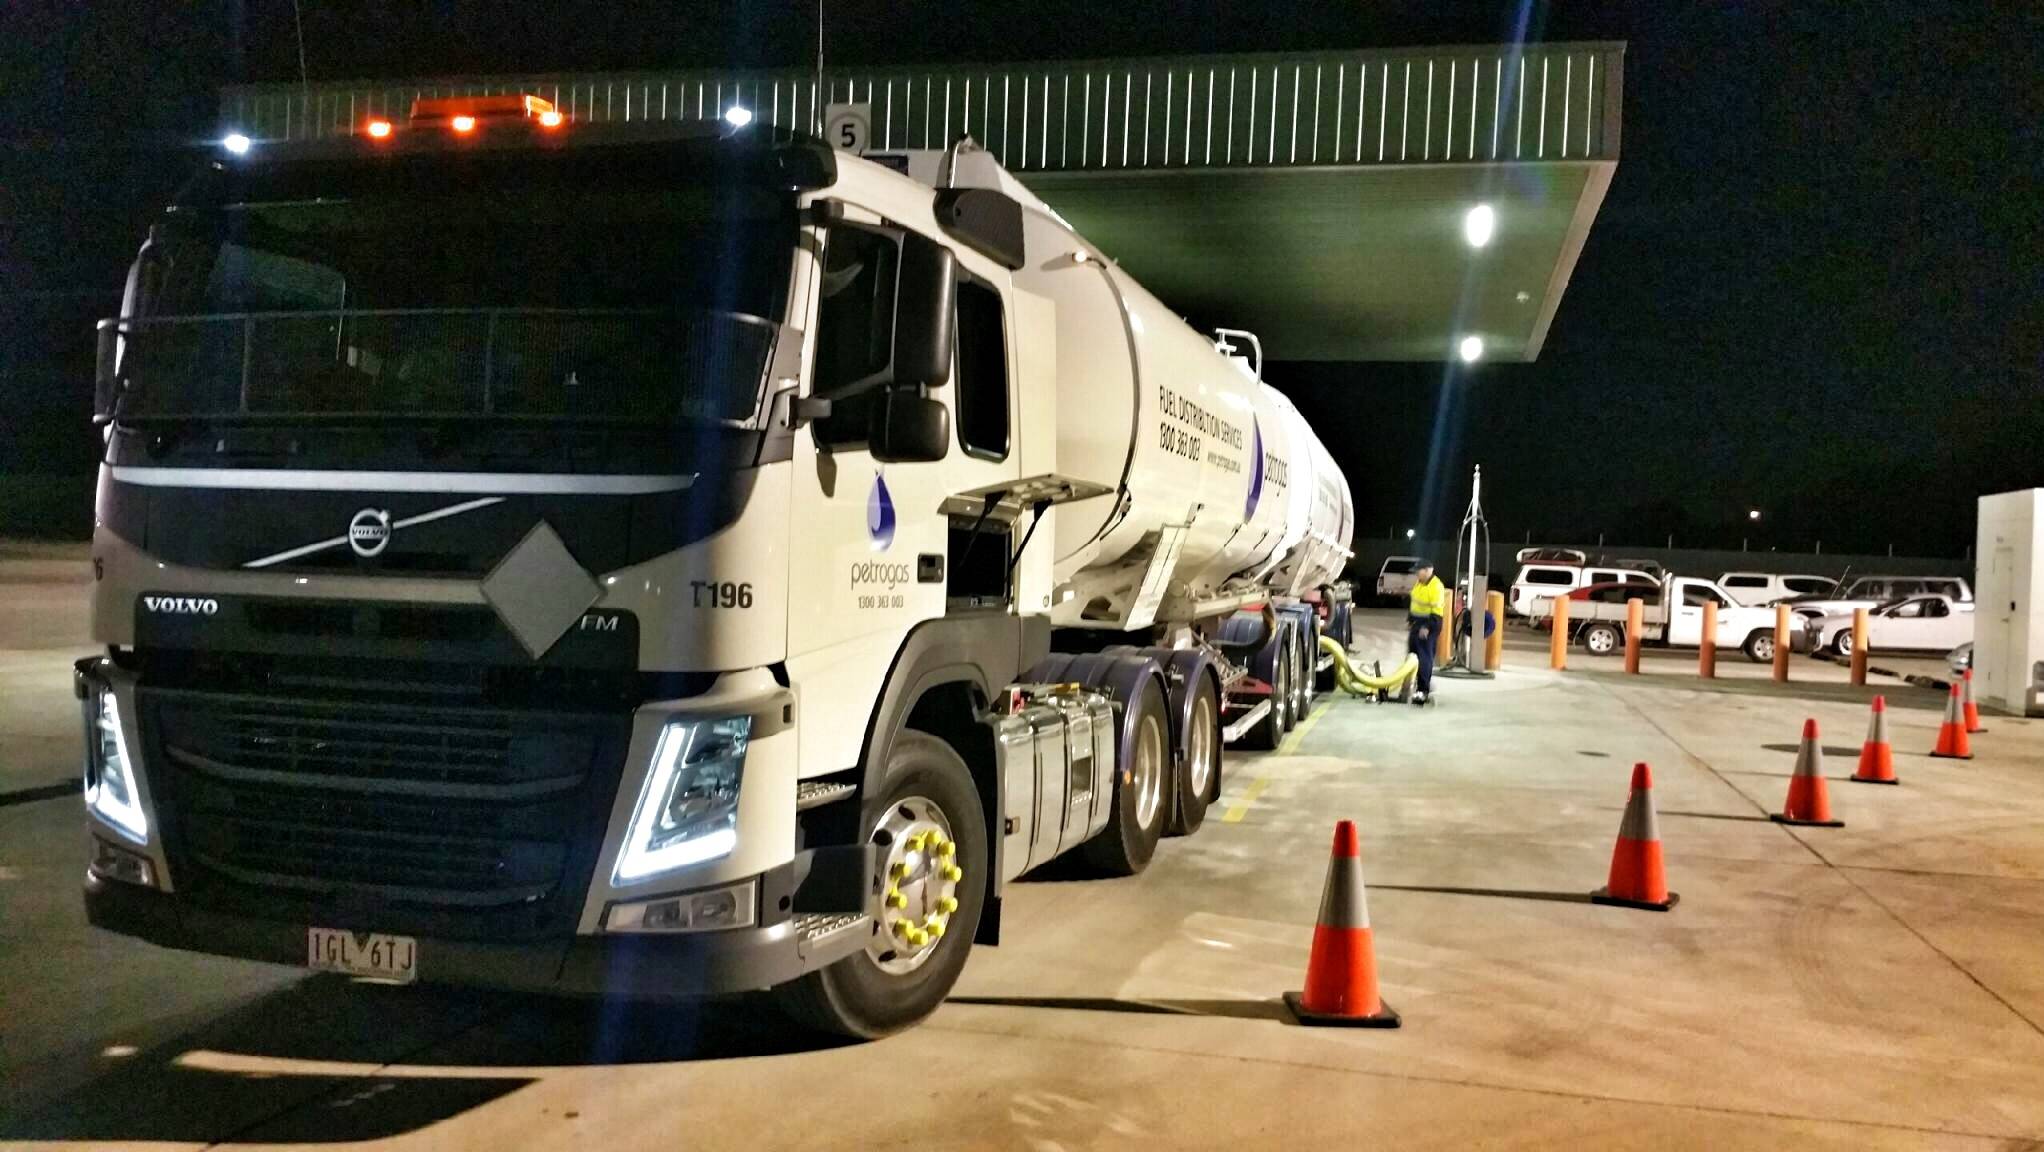 Image Photo— A Mobil fleet hauler, Petrogas, delivers diesel to a customer in Adelaide. “We ask a great deal of our drivers. Not only do they need to drive safely, but they have to load and unload their fuel cargos safely.”